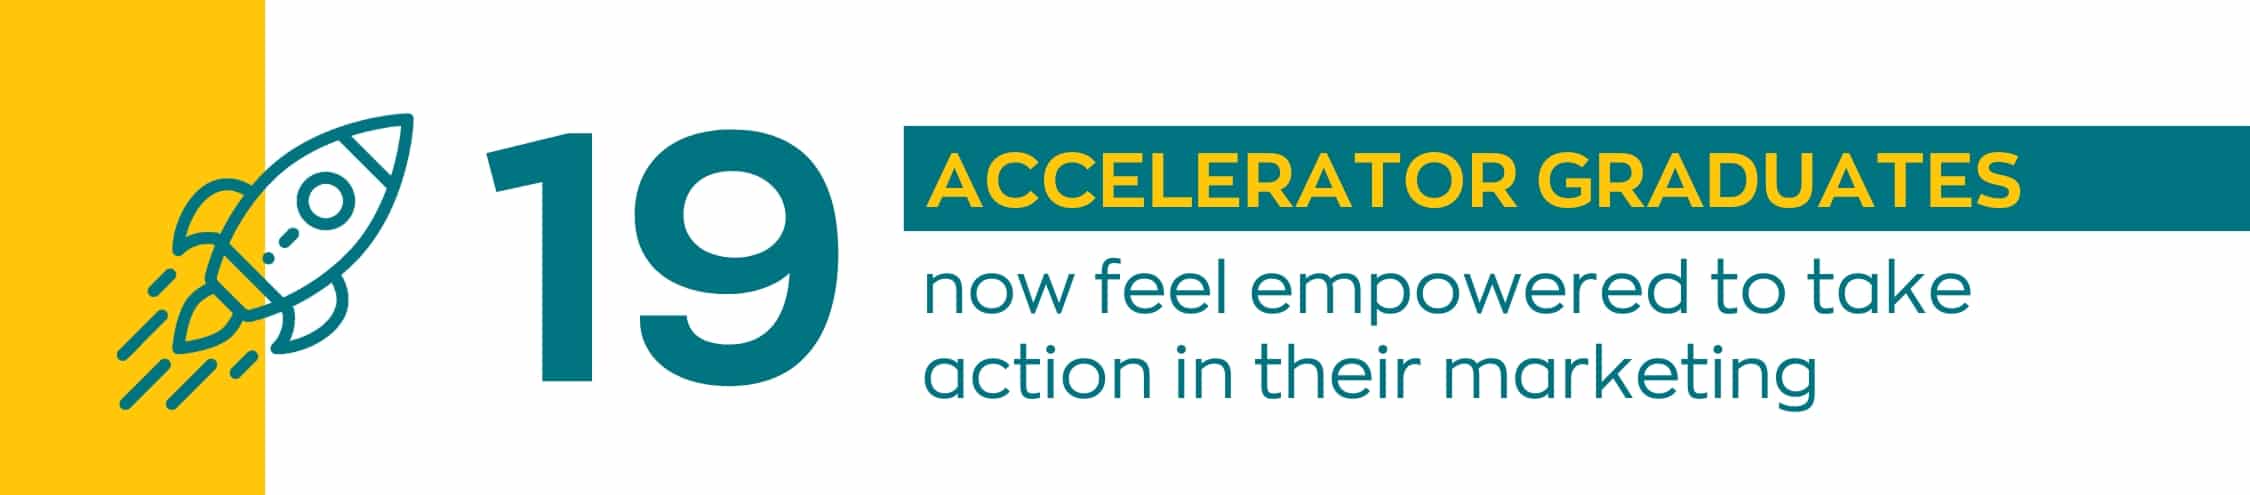 19 Accelerator graduates now feel empowered to take action in their marketing